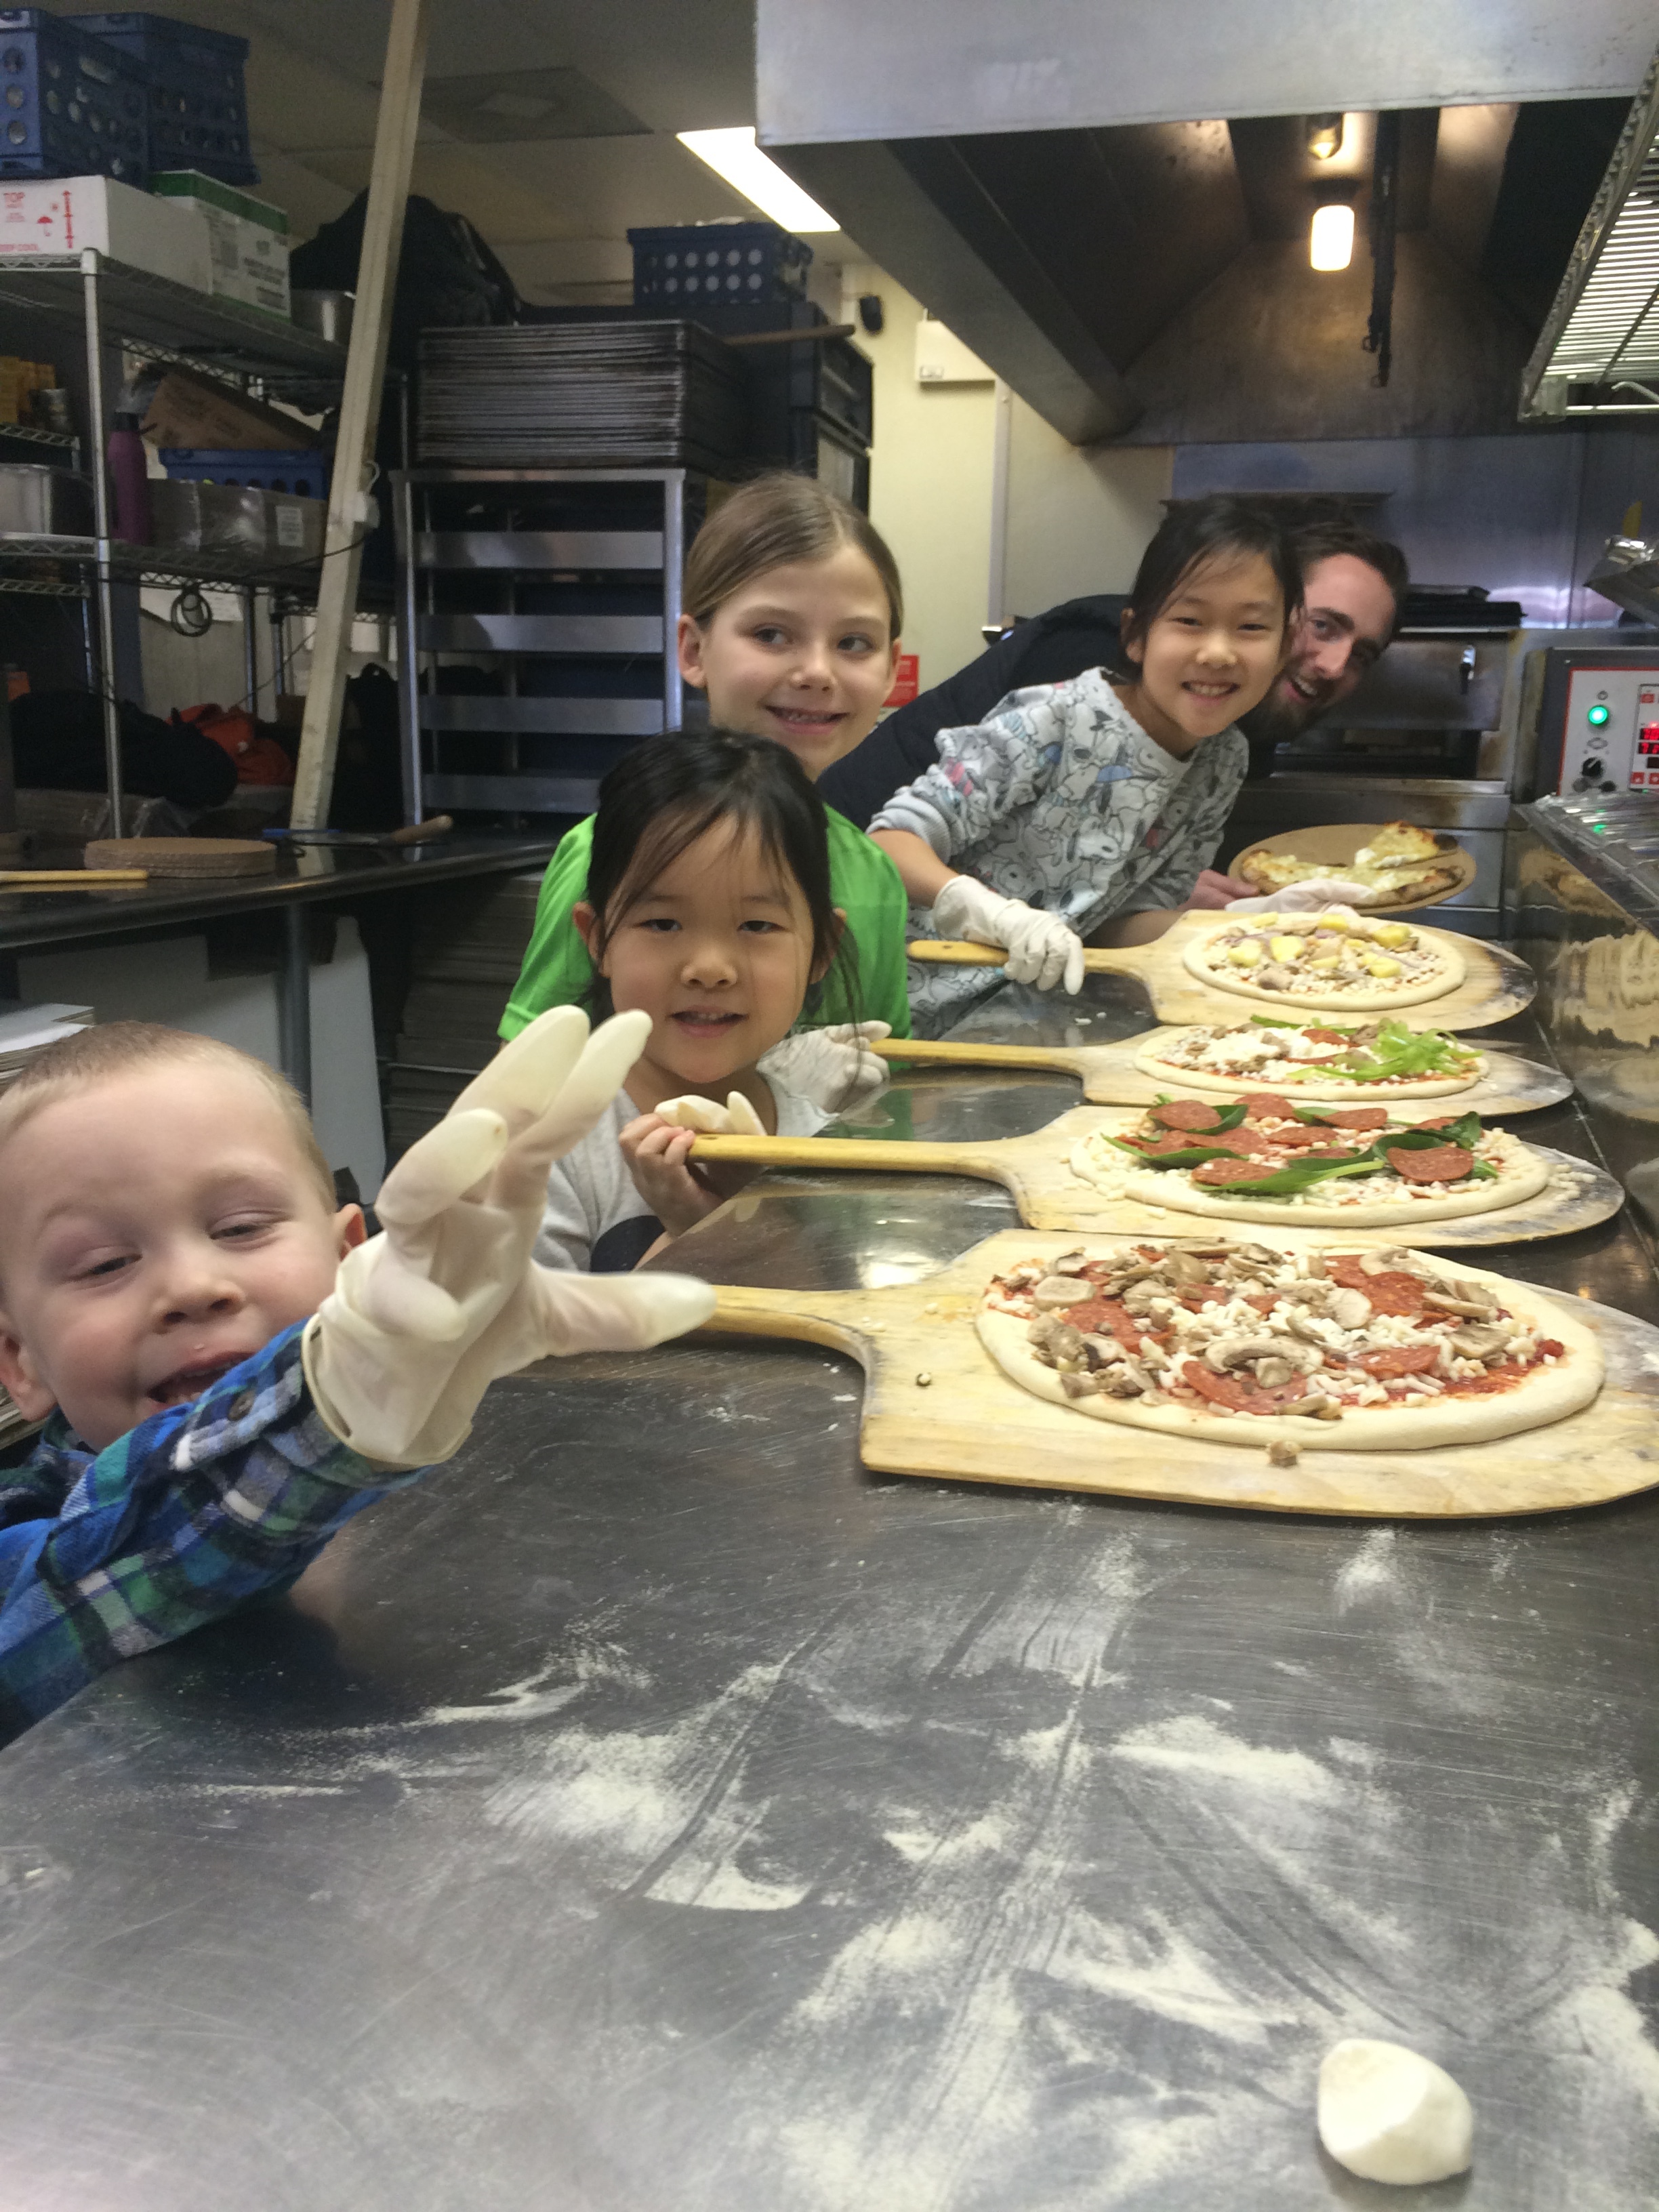 Overall huge success in bringing up the future stars of pizza artistry.